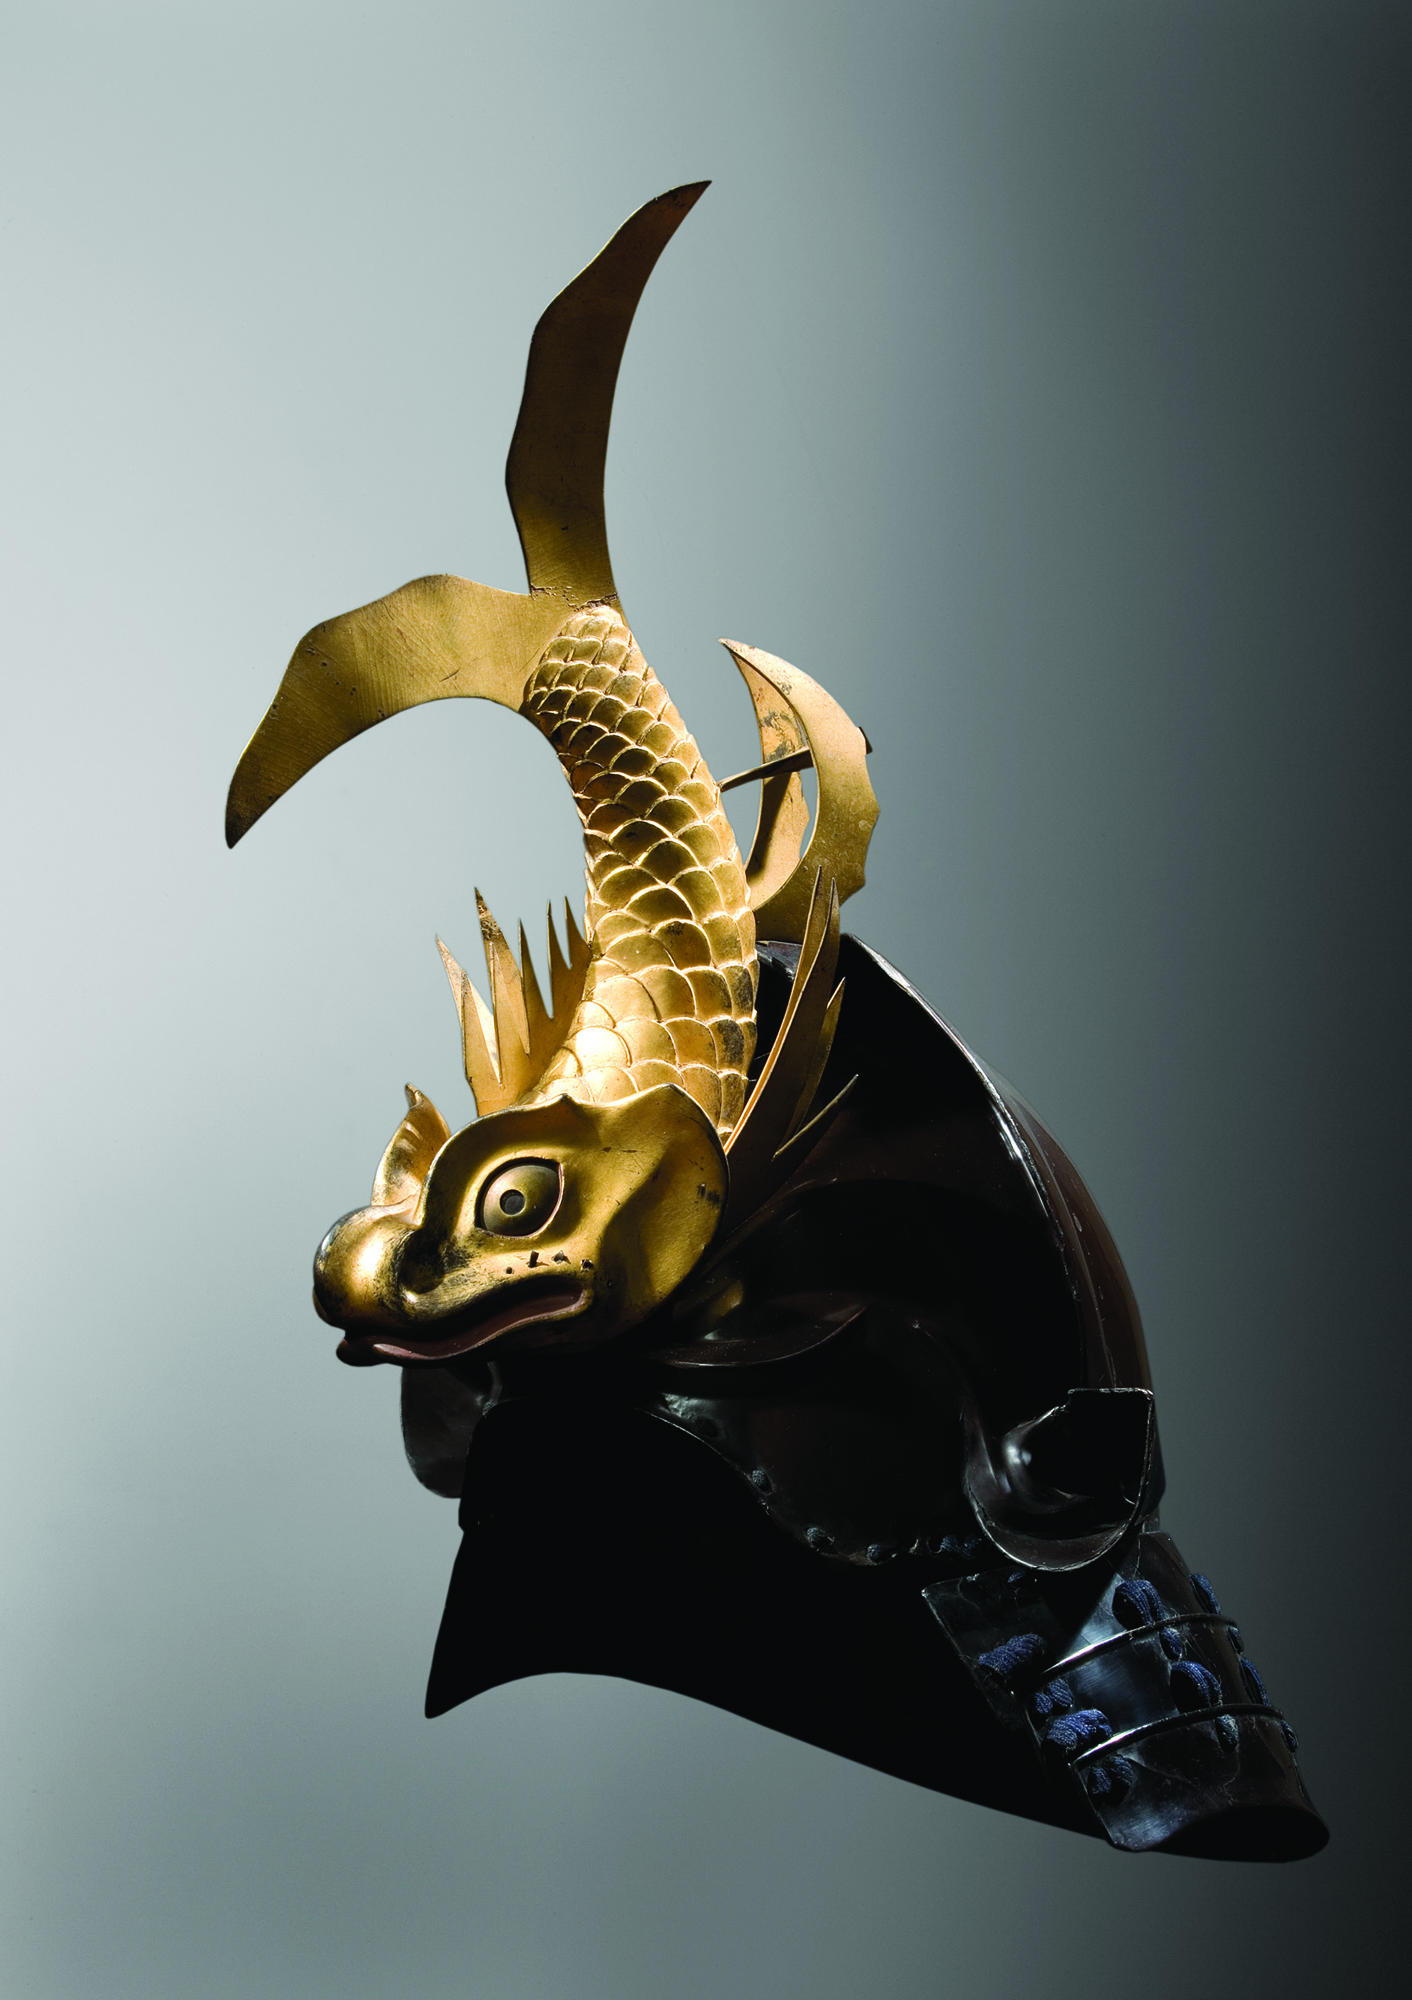 Used to exemplify status and to strike fear in the enemy, this samurai helmet dates back to 17th-century Japan.